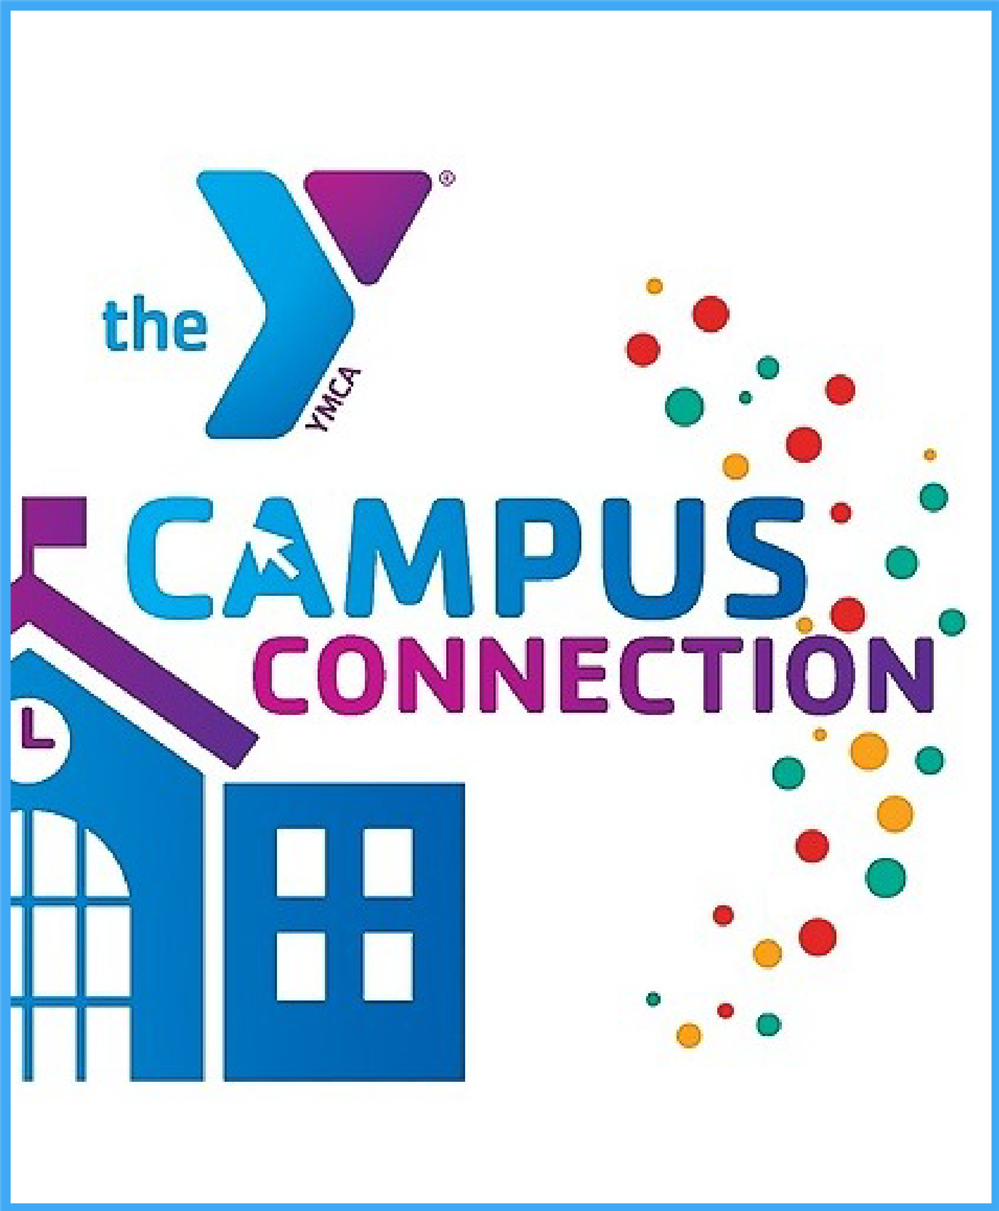  The YMCA Campus Connection